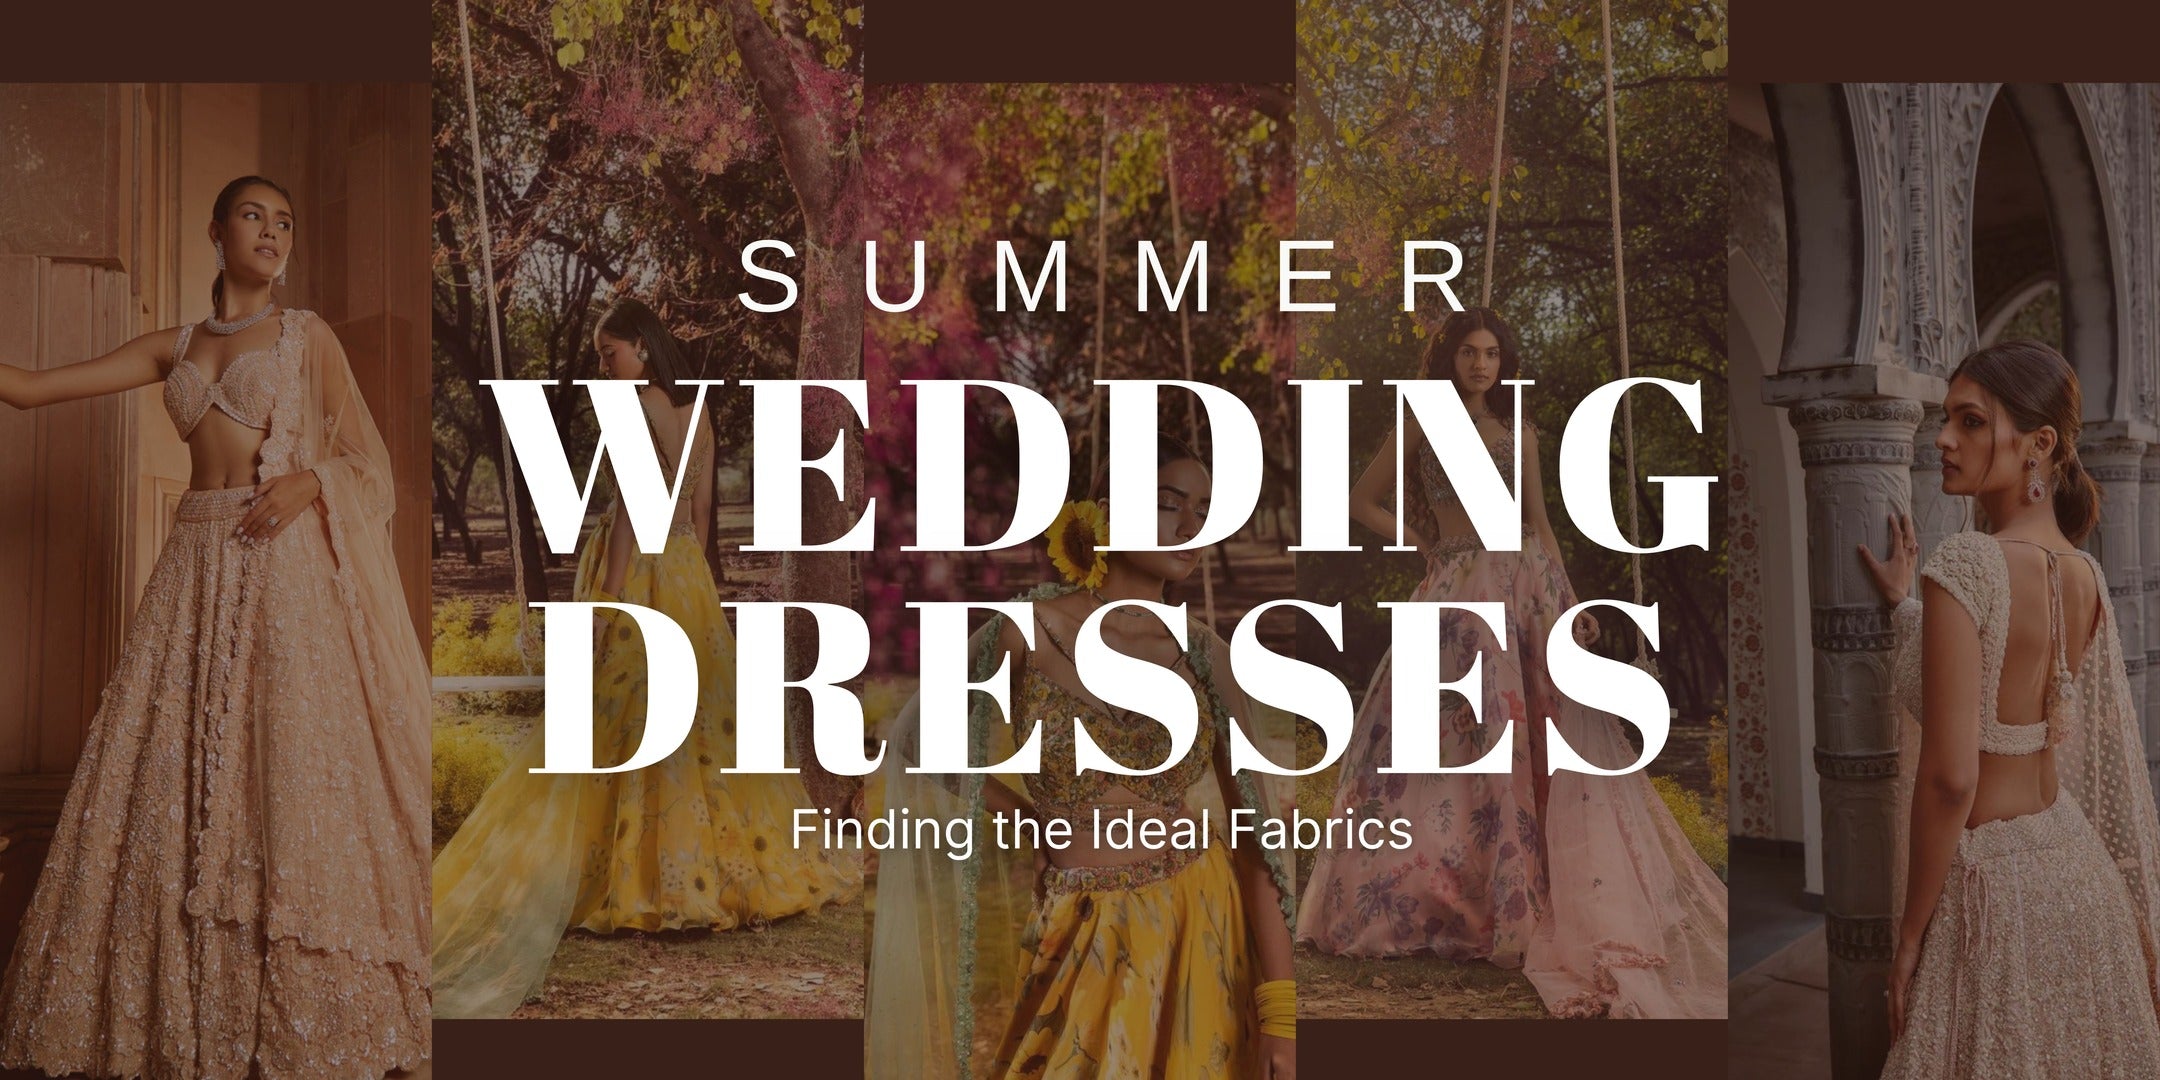 Light and Airy: Finding the Ideal Fabrics for Summer Wedding Dresses ...